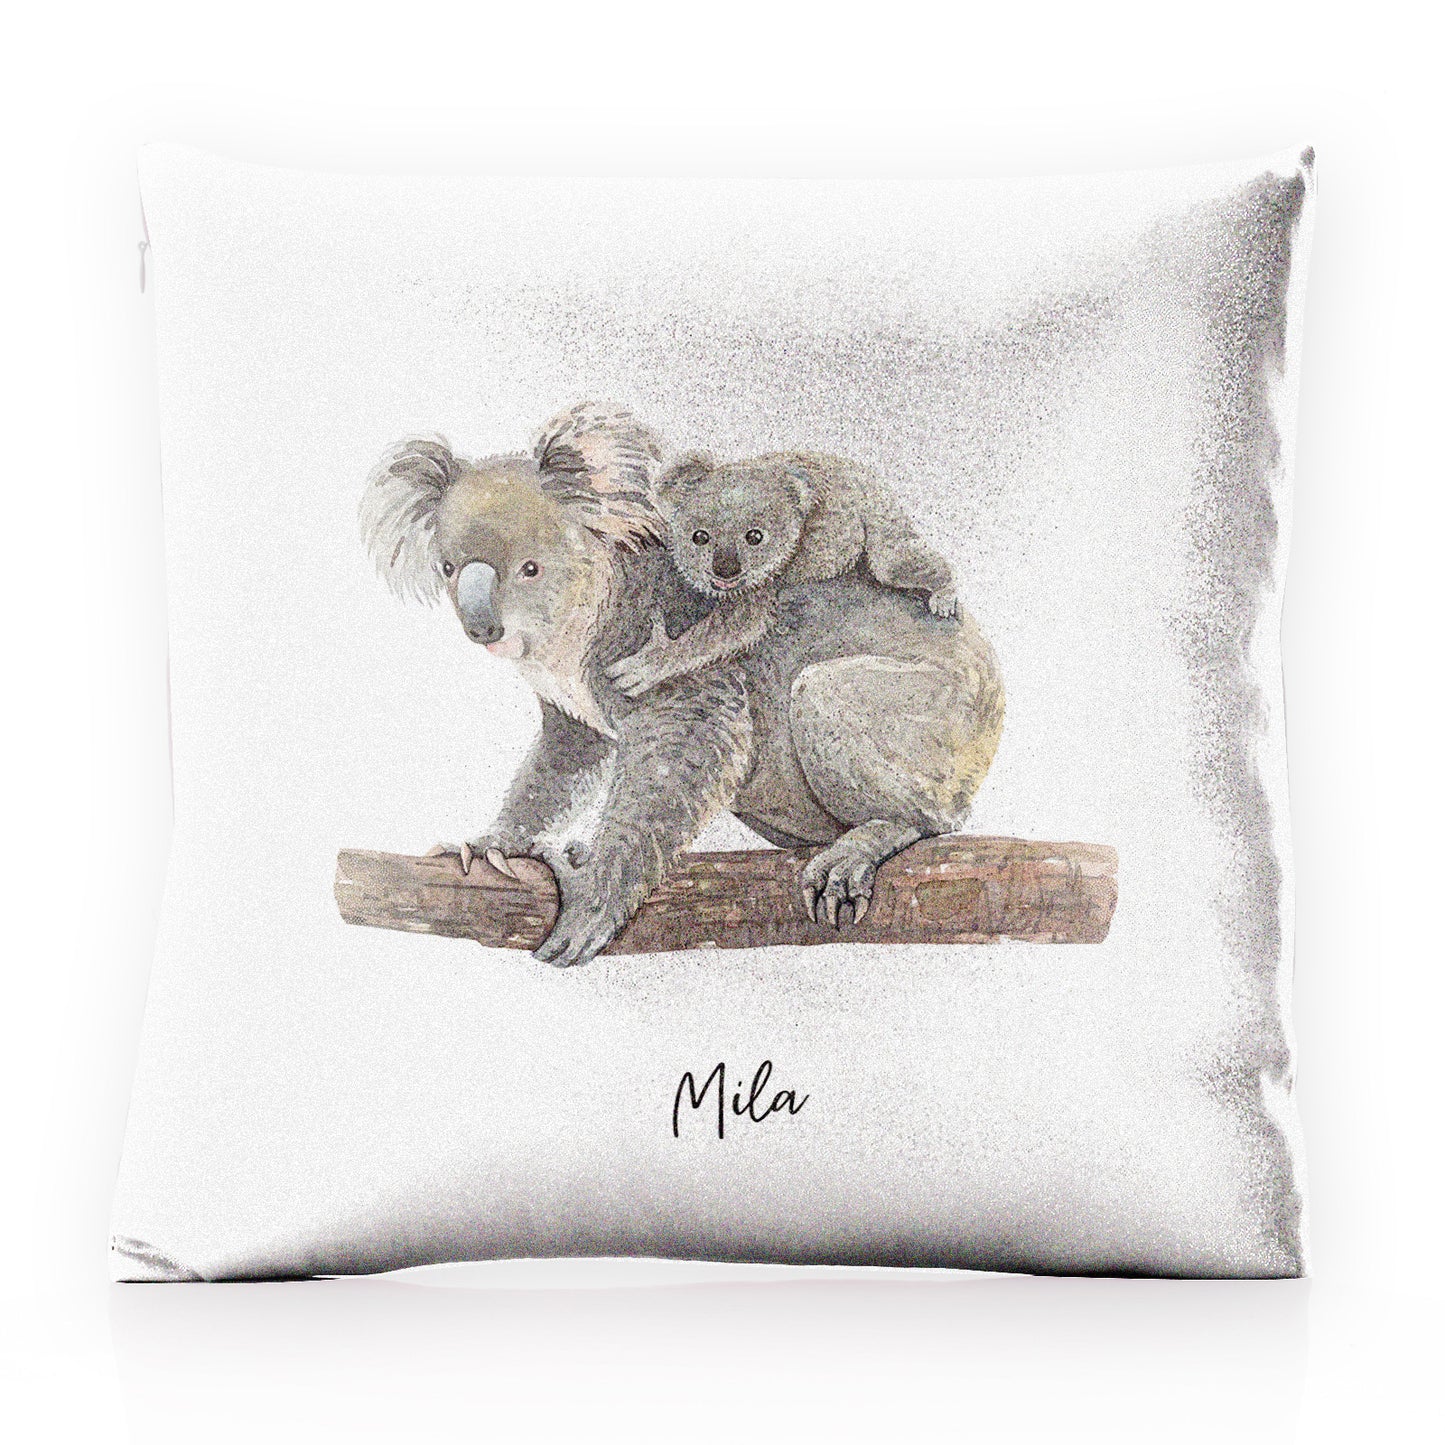 Personalised Glitter Cushion with Welcoming Text and Embracing Mum and Baby Koalas